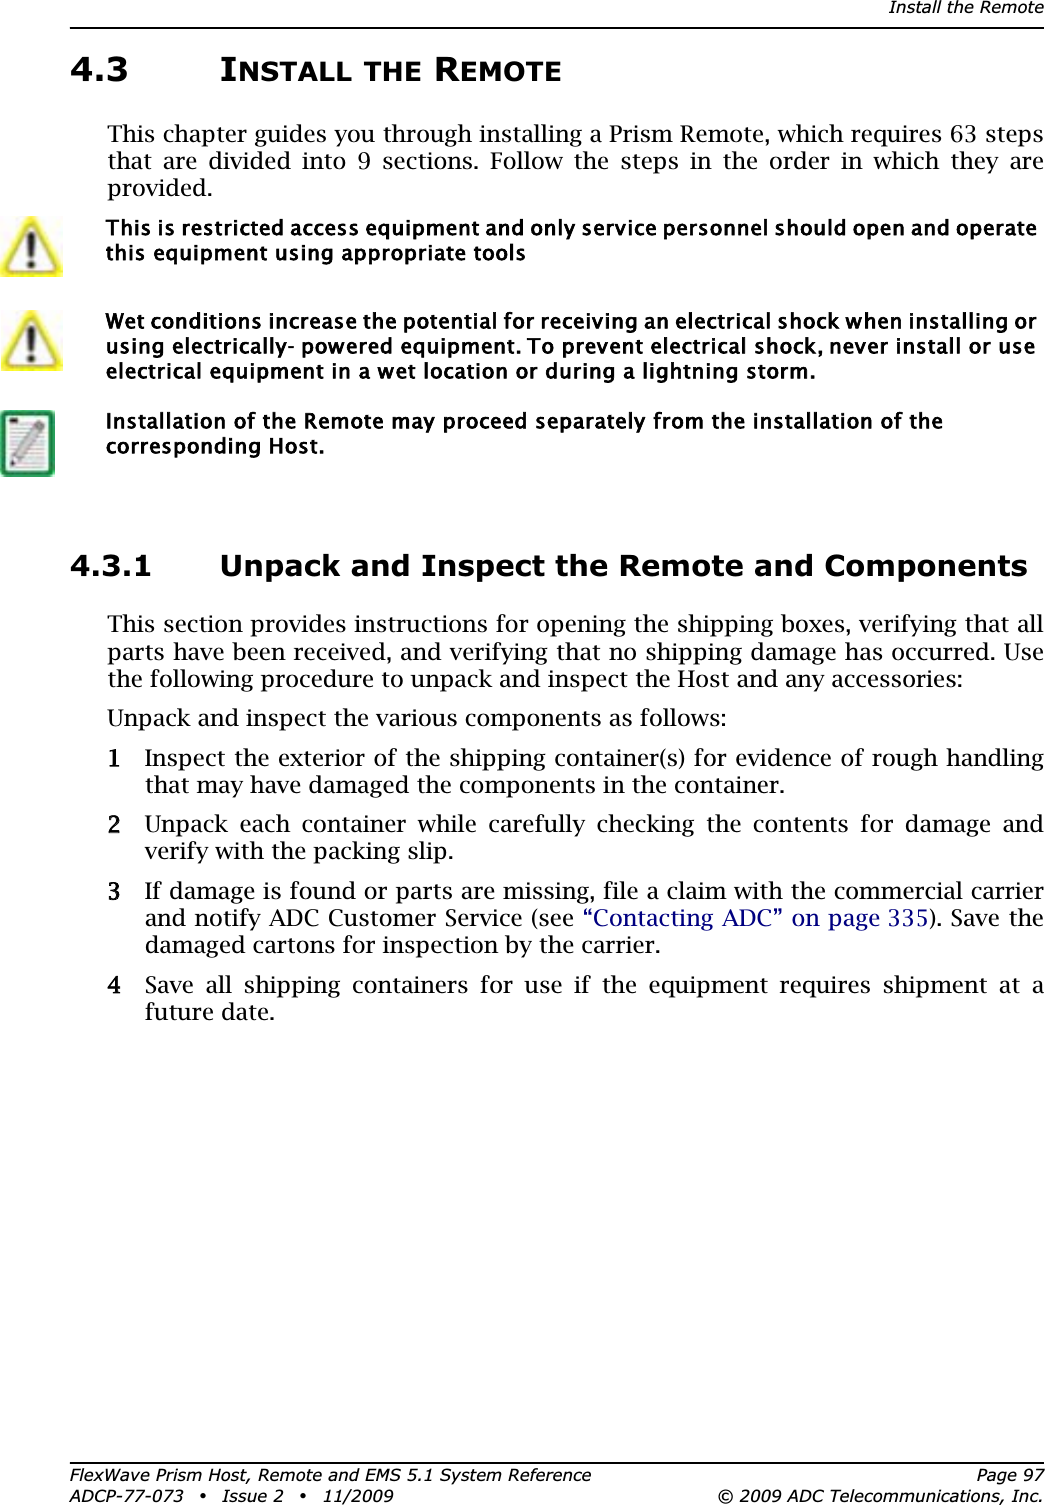 Install the RemoteFlexWave Prism Host, Remote and EMS 5.1 System Reference Page 97ADCP-77-073 • Issue 2 • 11/2009 © 2009 ADC Telecommunications, Inc.4.3 INSTALL THE REMOTEThis chapter guides you through installing a Prism Remote, which requires 63 steps that are divided into 9 sections. Follow the steps in the order in which they are provided.4.3.1 Unpack and Inspect the Remote and ComponentsThis section provides instructions for opening the shipping boxes, verifying that all parts have been received, and verifying that no shipping damage has occurred. Use the following procedure to unpack and inspect the Host and any accessories: Unpack and inspect the various components as follows:11 Inspect the exterior of the shipping container(s) for evidence of rough handling that may have damaged the components in the container.22 Unpack each container while carefully checking the contents for damage and verify with the packing slip.33 If damage is found or parts are missing, file a claim with the commercial carrier and notify ADC Customer Service (see “Contacting ADC” on page 335). Save the damaged cartons for inspection by the carrier.44 Save all shipping containers for use if the equipment requires shipment at a future date. This is restricted access equipment and only service personnel should open and operate this equipment using appropriate toolsWet conditions increase the potential for receiving an electrical shock when installing or using electrically- powered equipment. To prevent electrical shock, never install or use electrical equipment in a wet location or during a lightning storm.Installation of the Remote may proceed separately from the installation of the corresponding Host. 